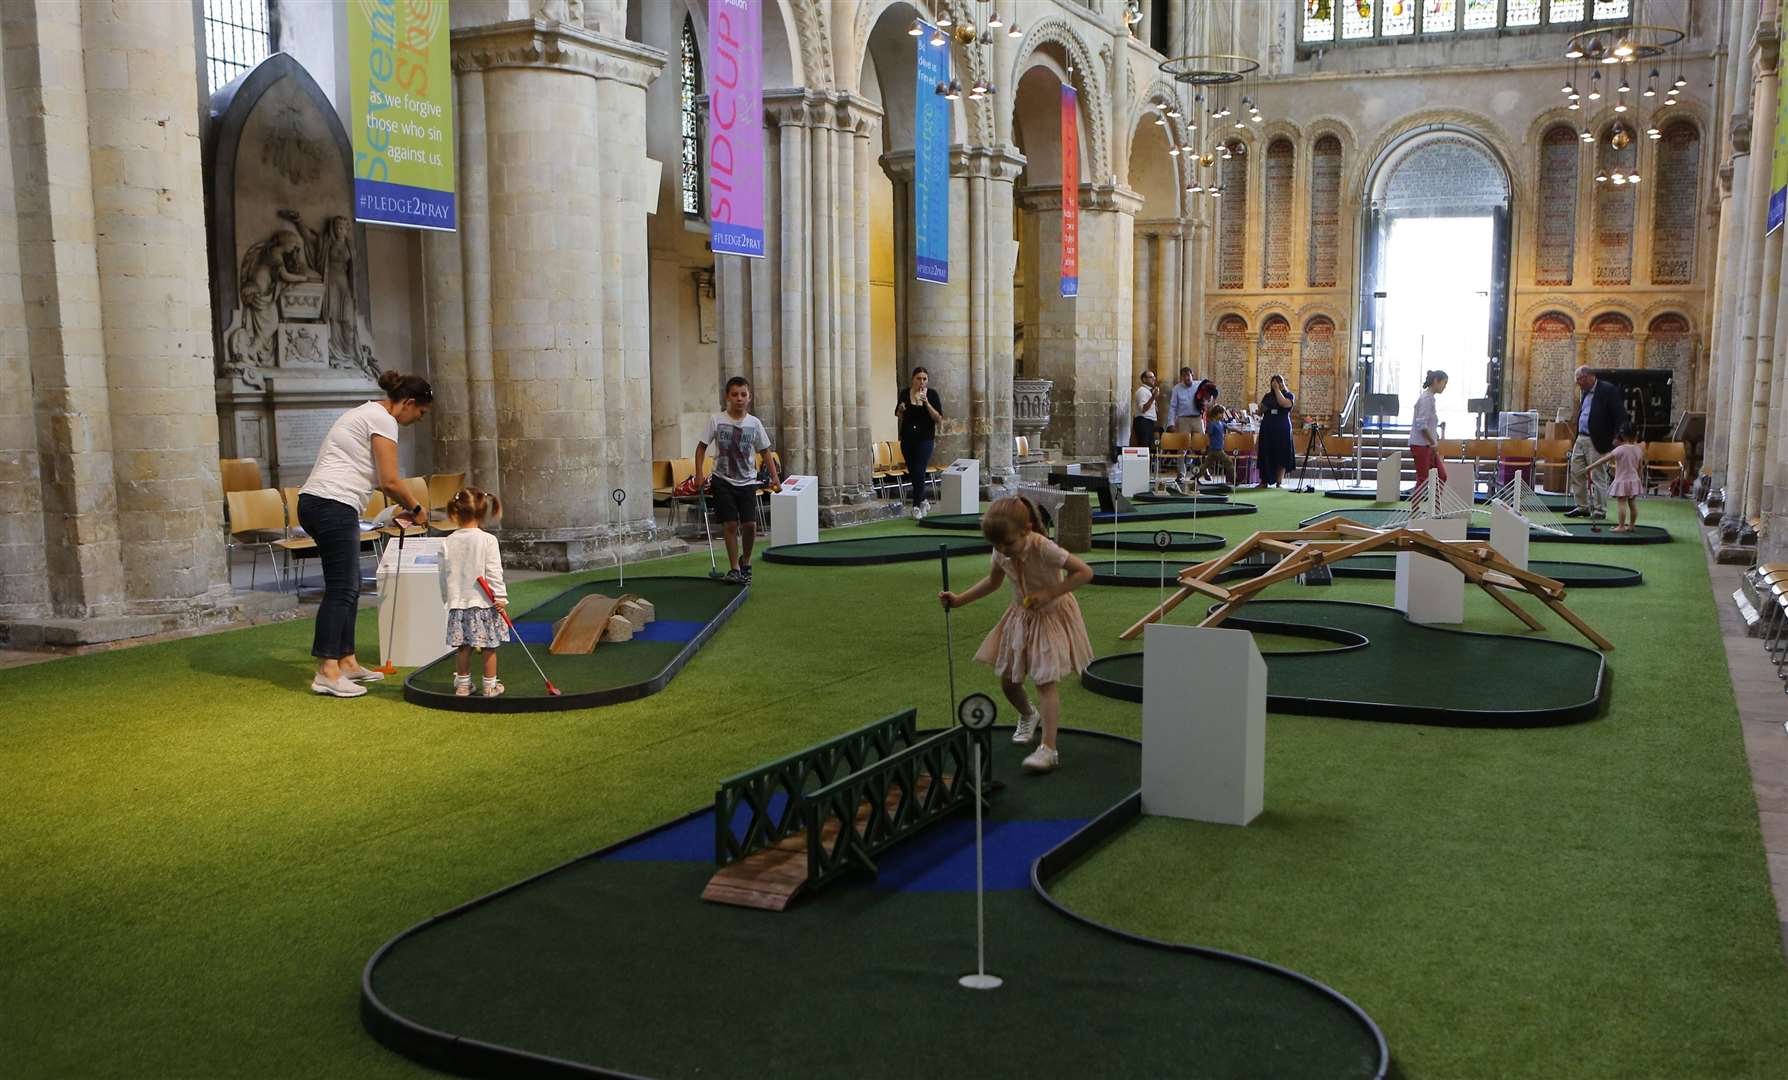 A crazy golf course opened at Rochester Cathedral